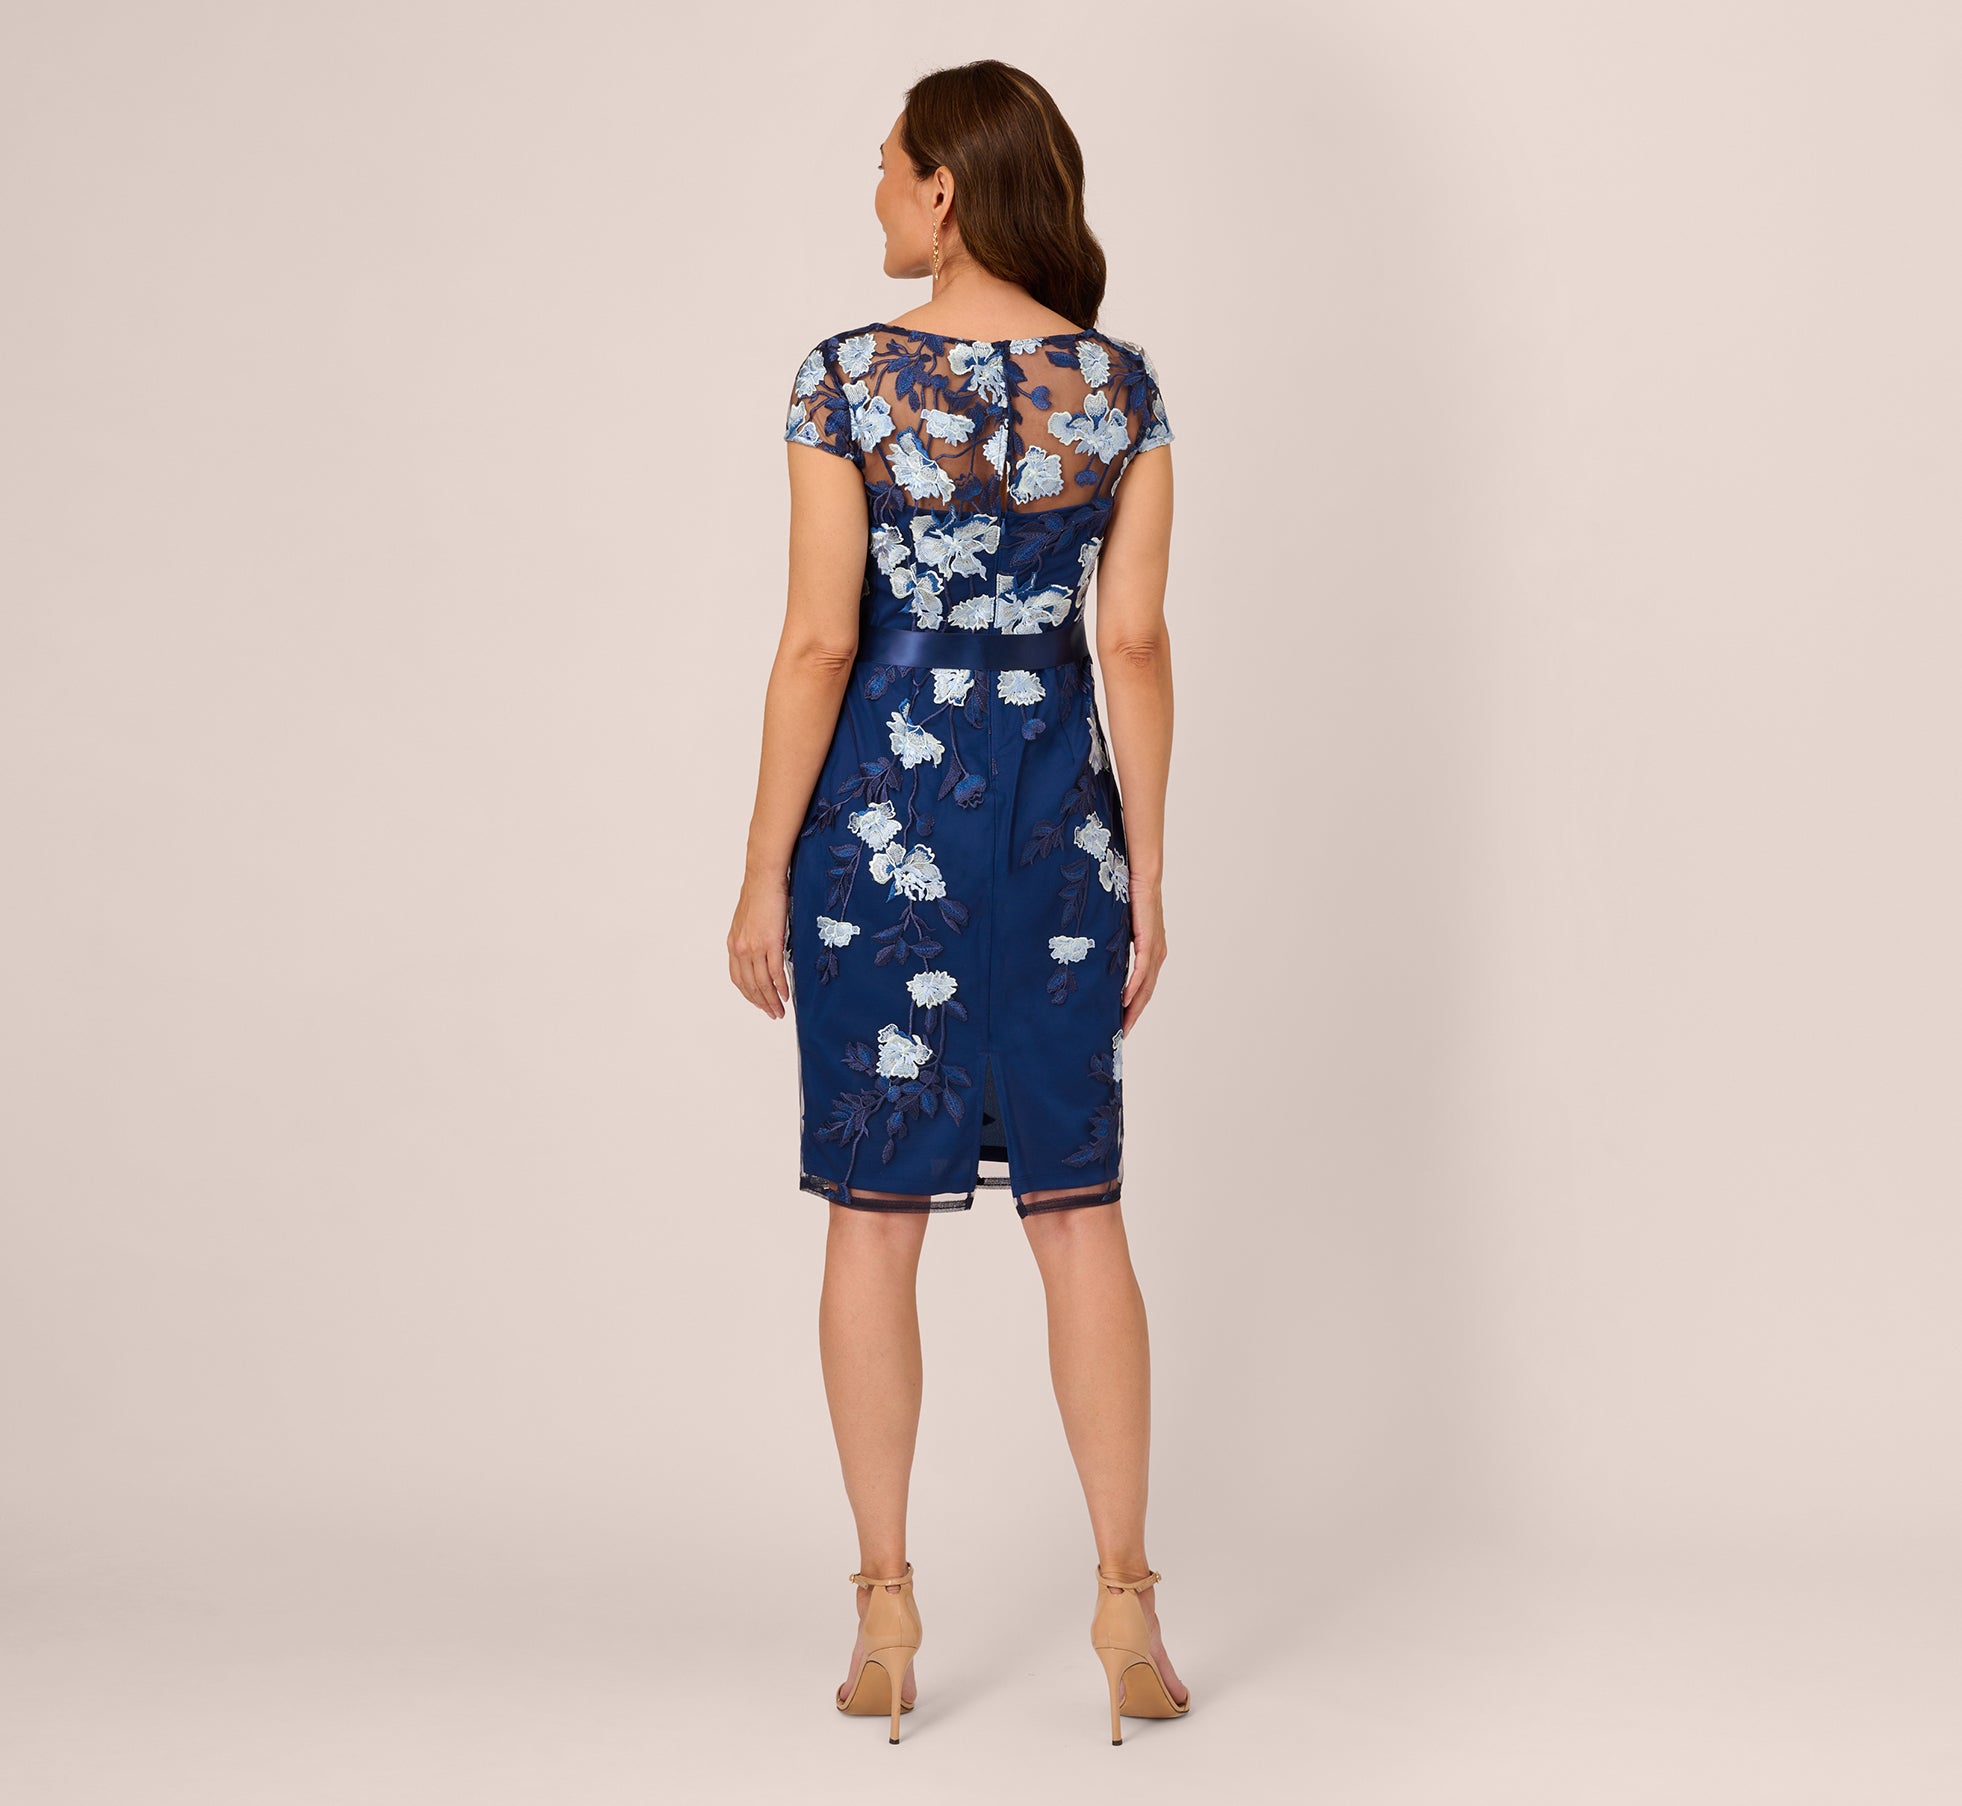 Embroidered Sheath Dress In Midnight Multi | Adrianna Papell